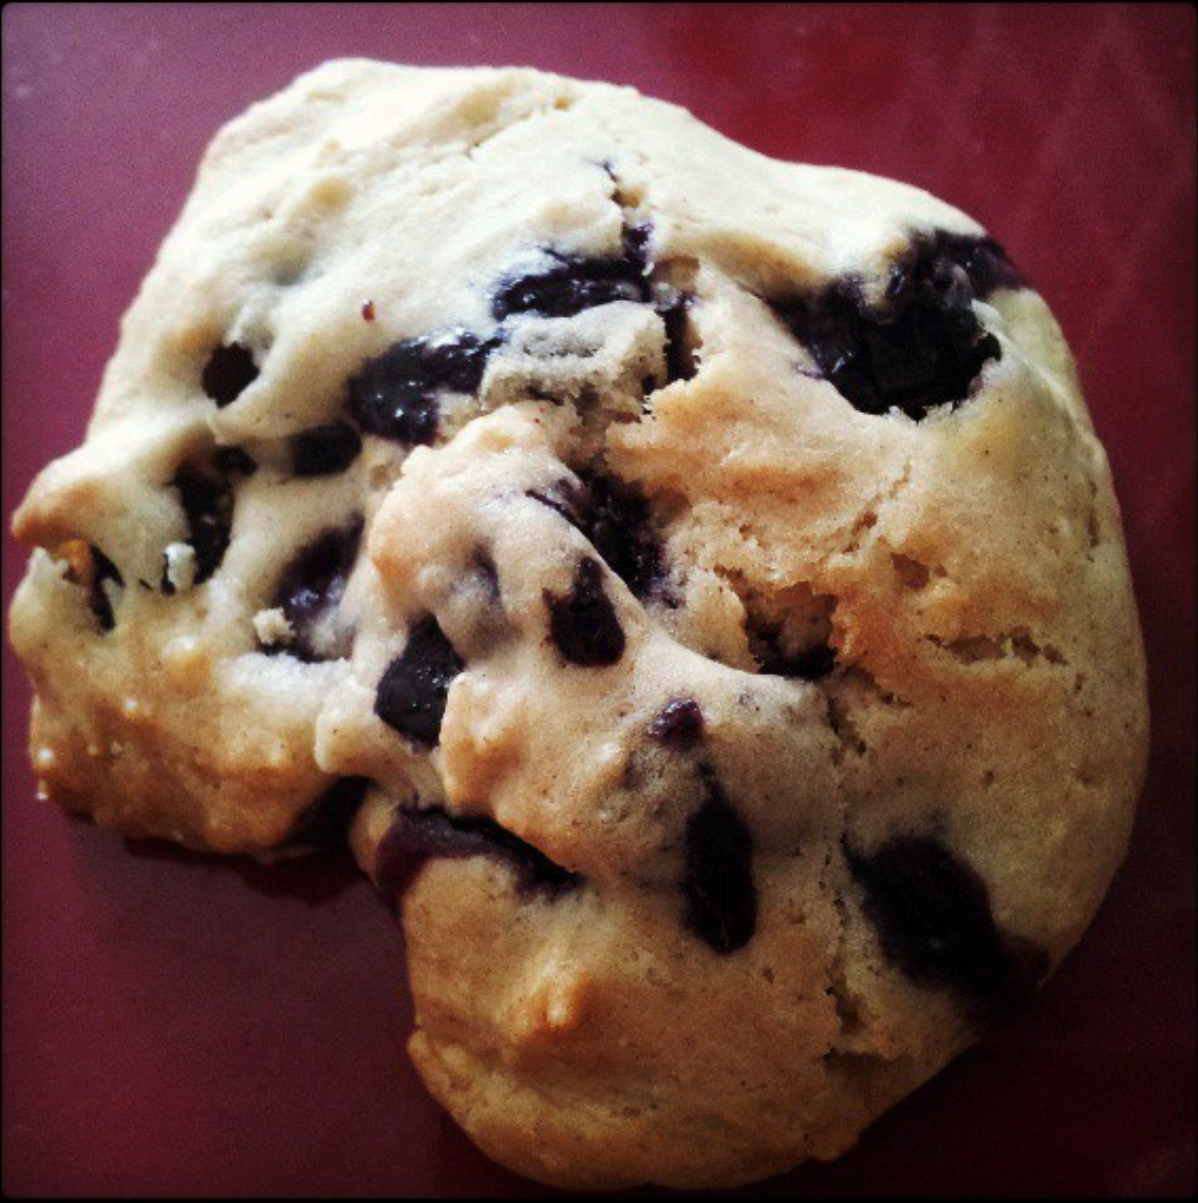 Baking Disaster 2 - Sad undercooked blueberry drop scone